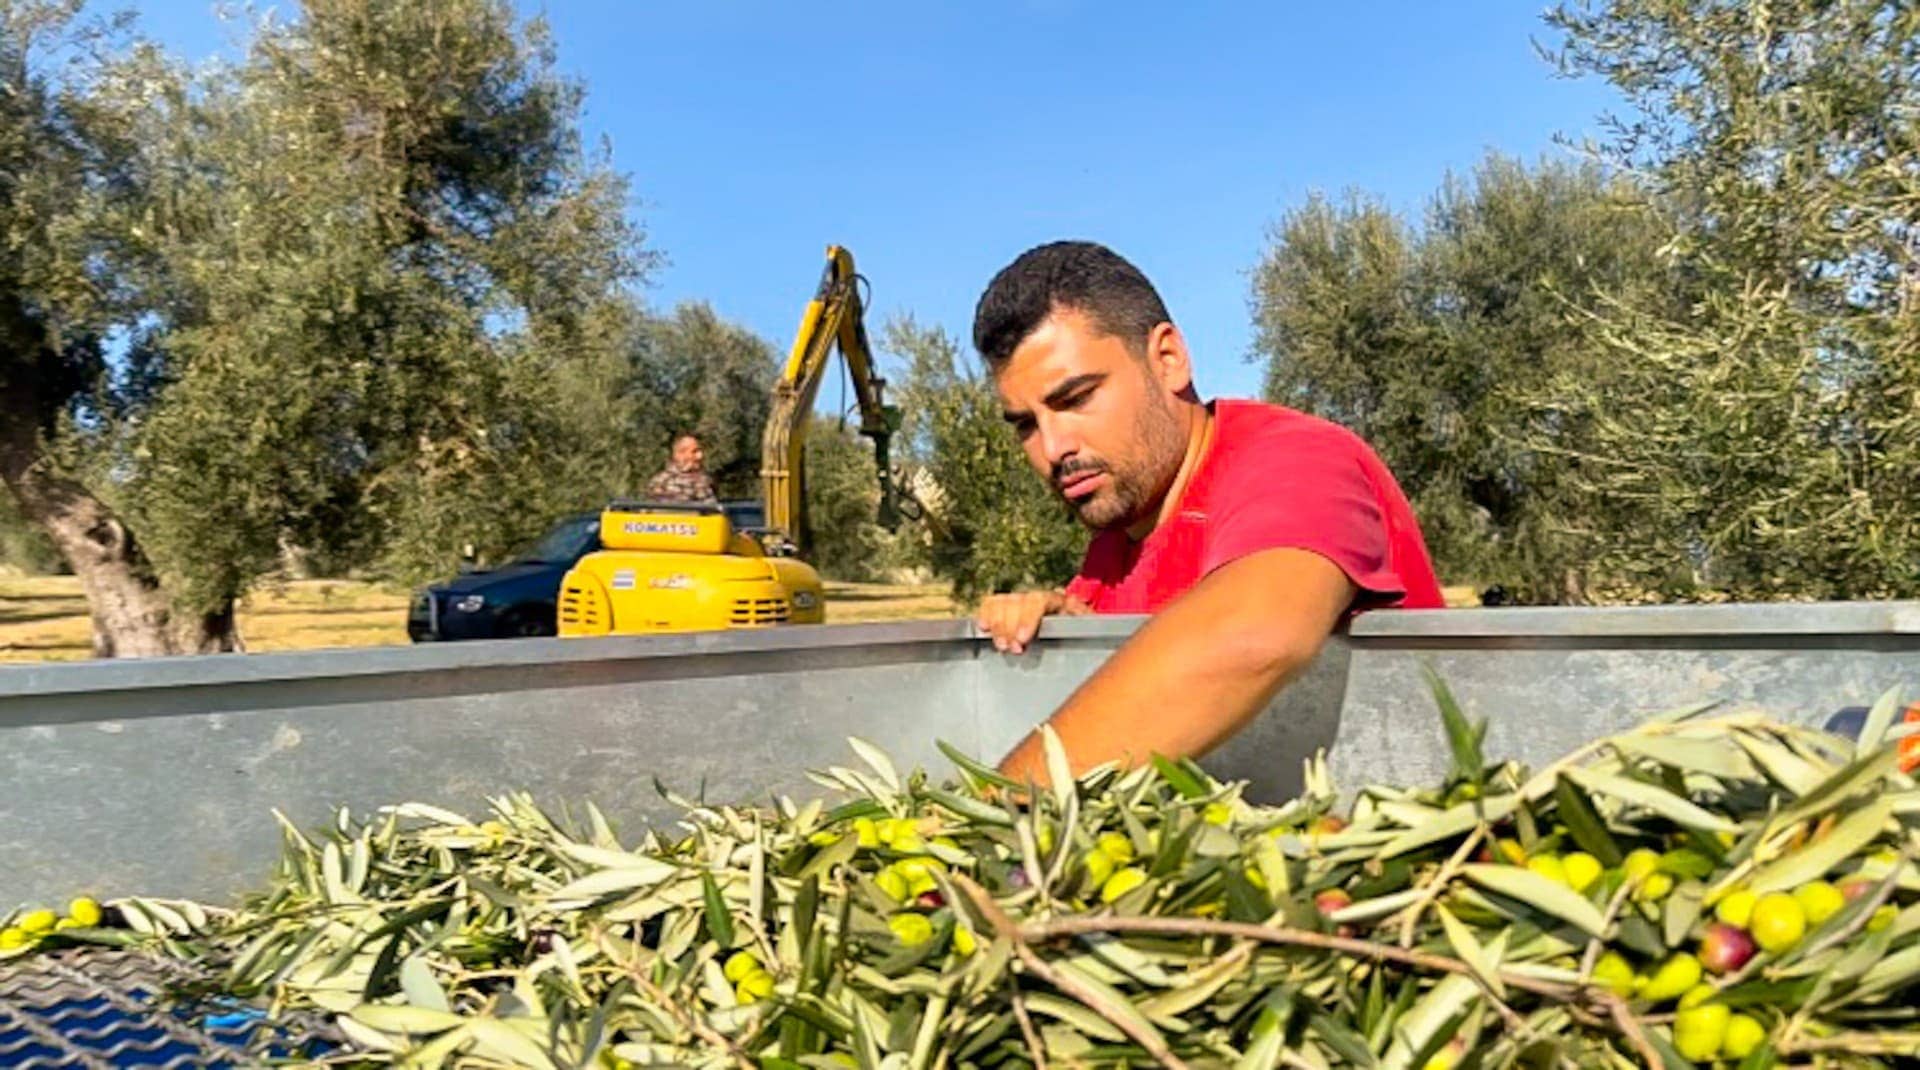 europe-the-best-olive-oils-competitions-production-tradition-technology-yield-winning-results-for-southern-italian-producers-olive-oil-times